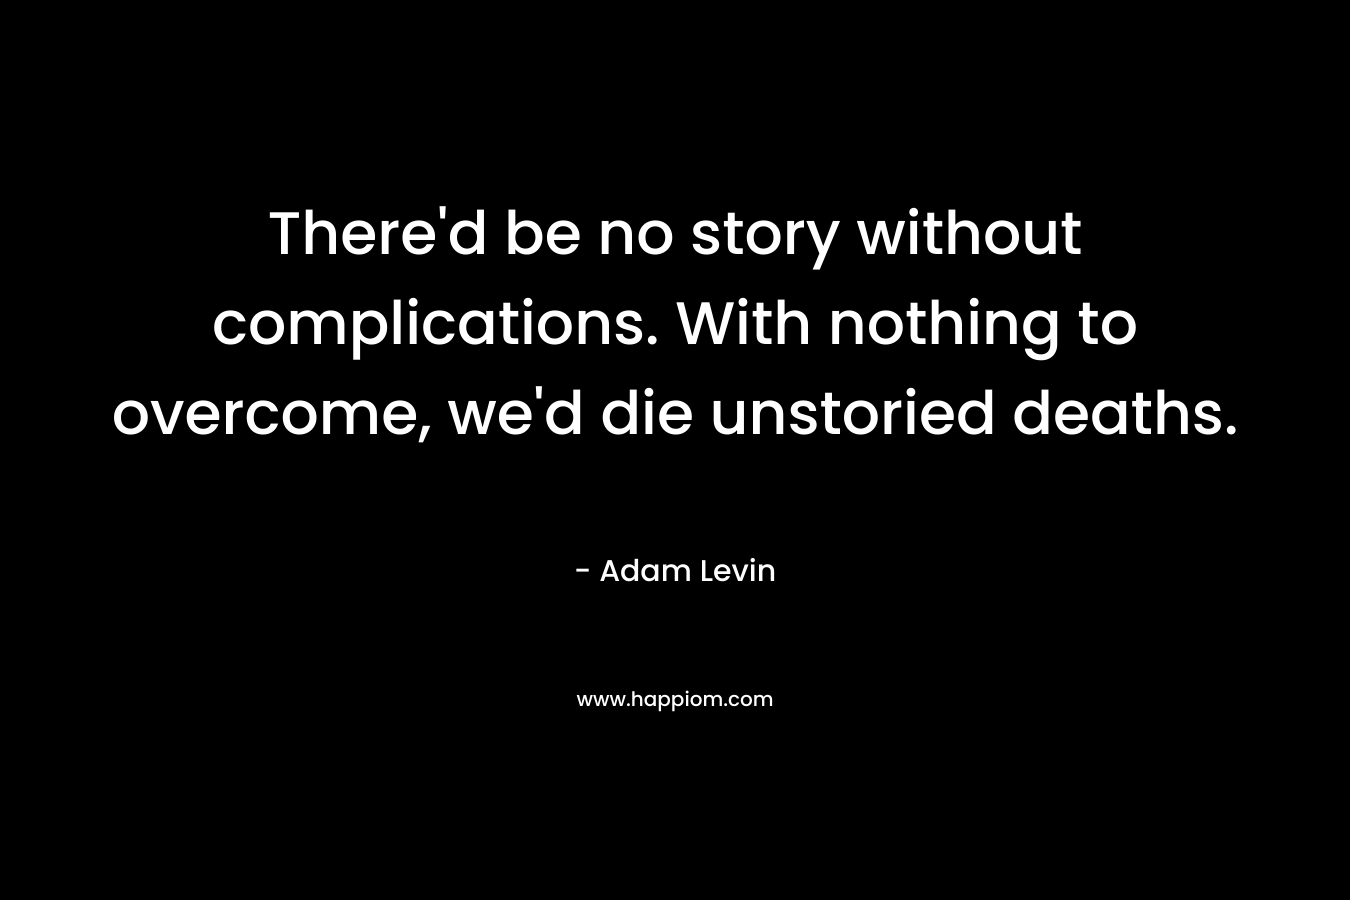 There’d be no story without complications. With nothing to overcome, we’d die unstoried deaths. – Adam Levin